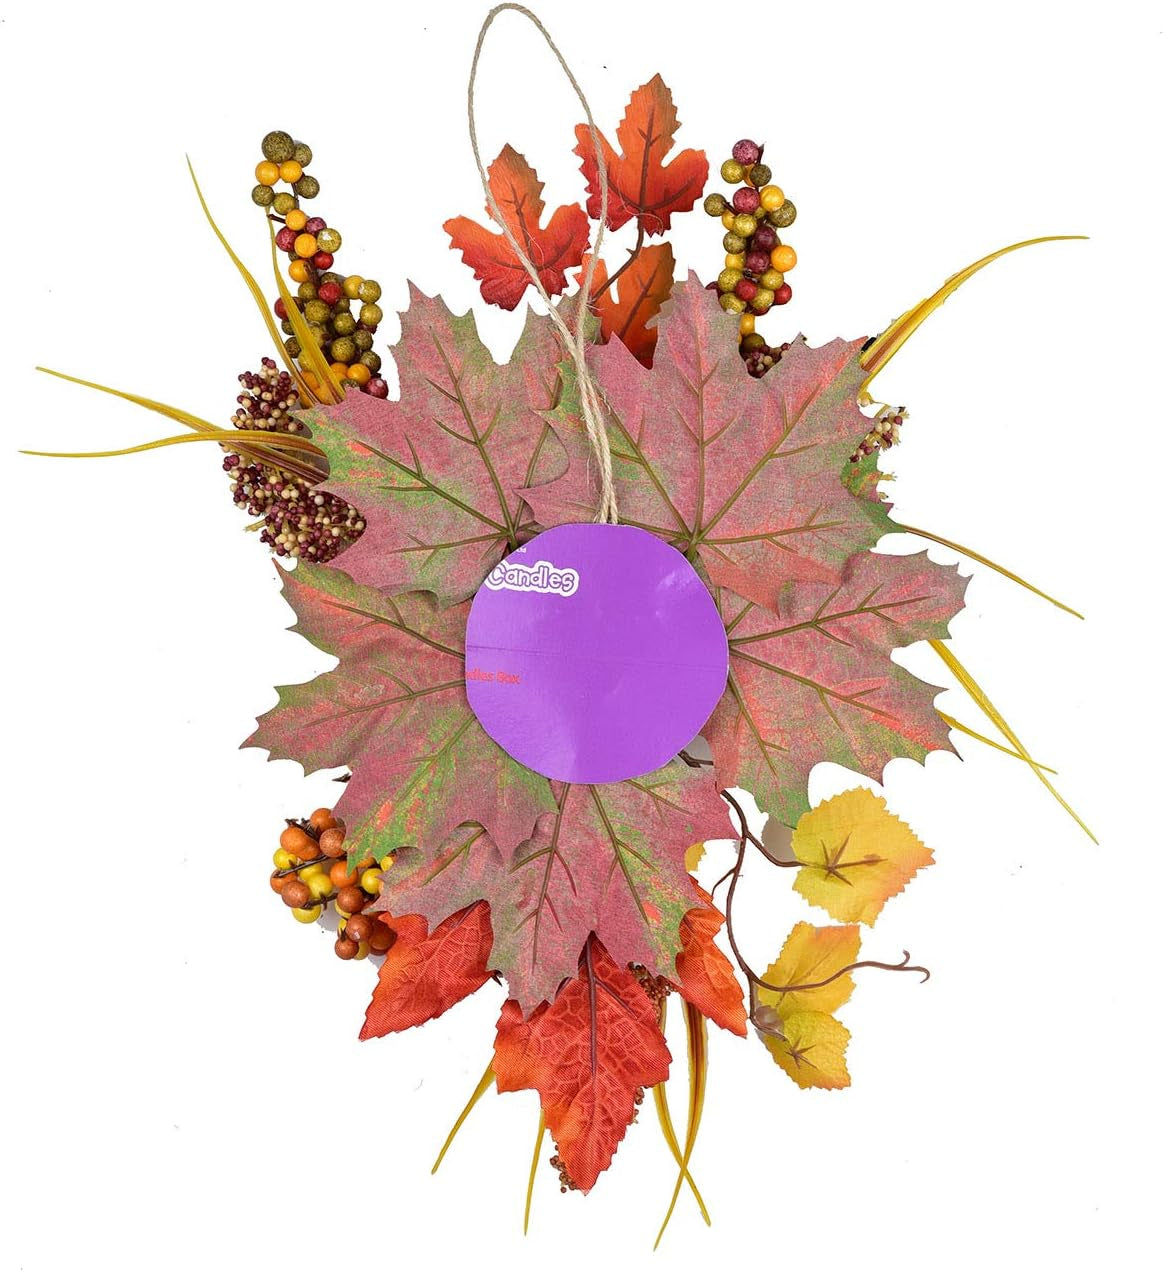 Artificial Fall Harvest Swag - Autumn Decorative Swag with Pine Cone,Maple Leaves,Grain and Berries, Wreaths and Floral Decorations Front Door Wall Decor Holiday Ornaments (2)